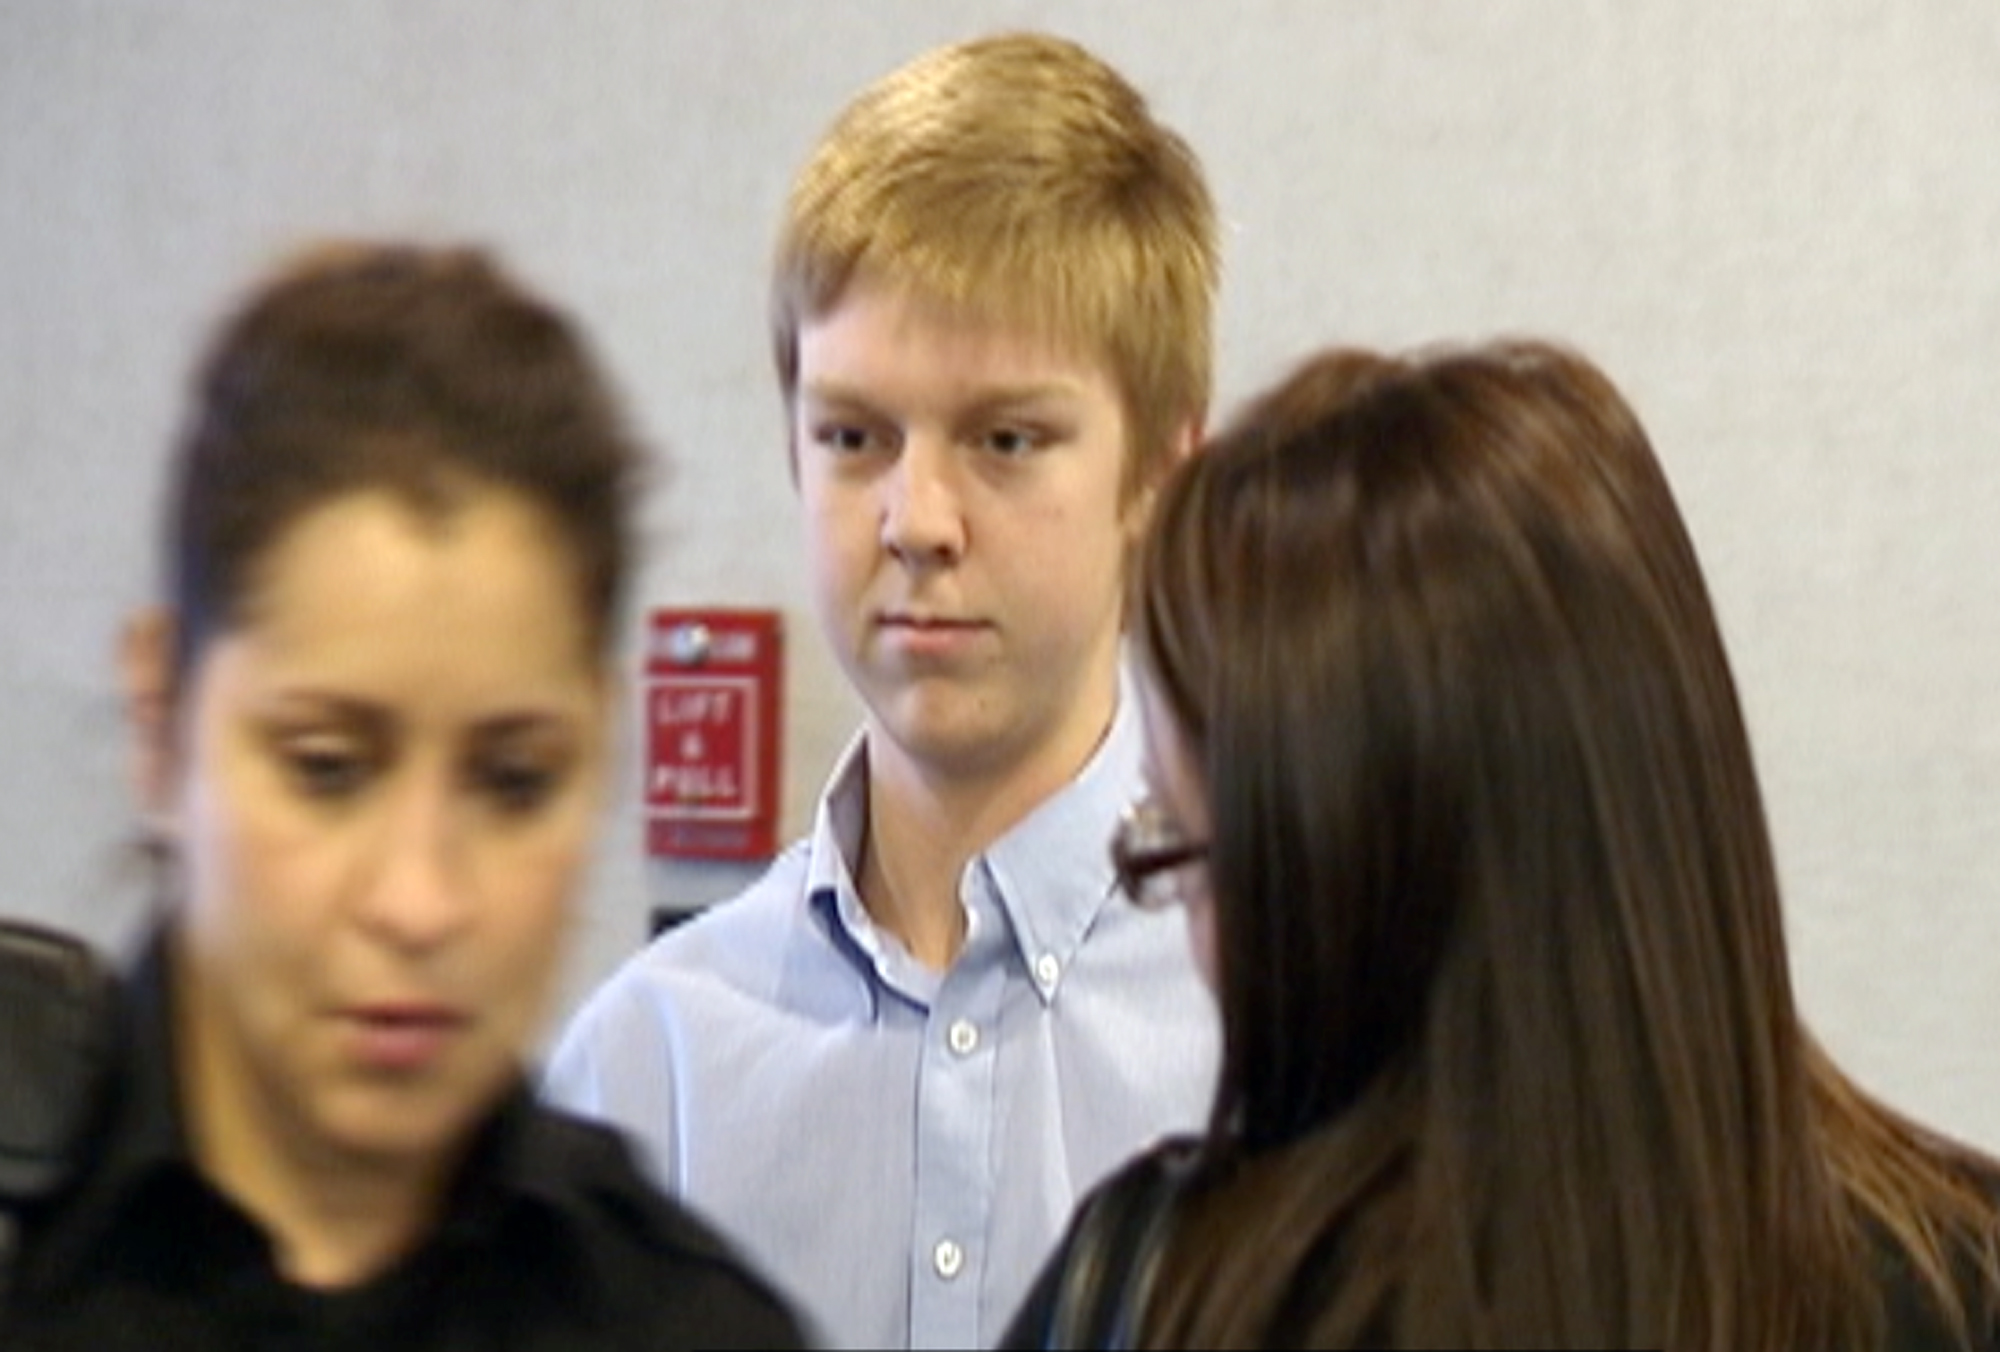 Ethan Couch is seen during his court hearing in Fort Worth, Texas in this December 2013 image taken from a video by KDFW-FOX 4. (KDFW-FOX 4/AP)